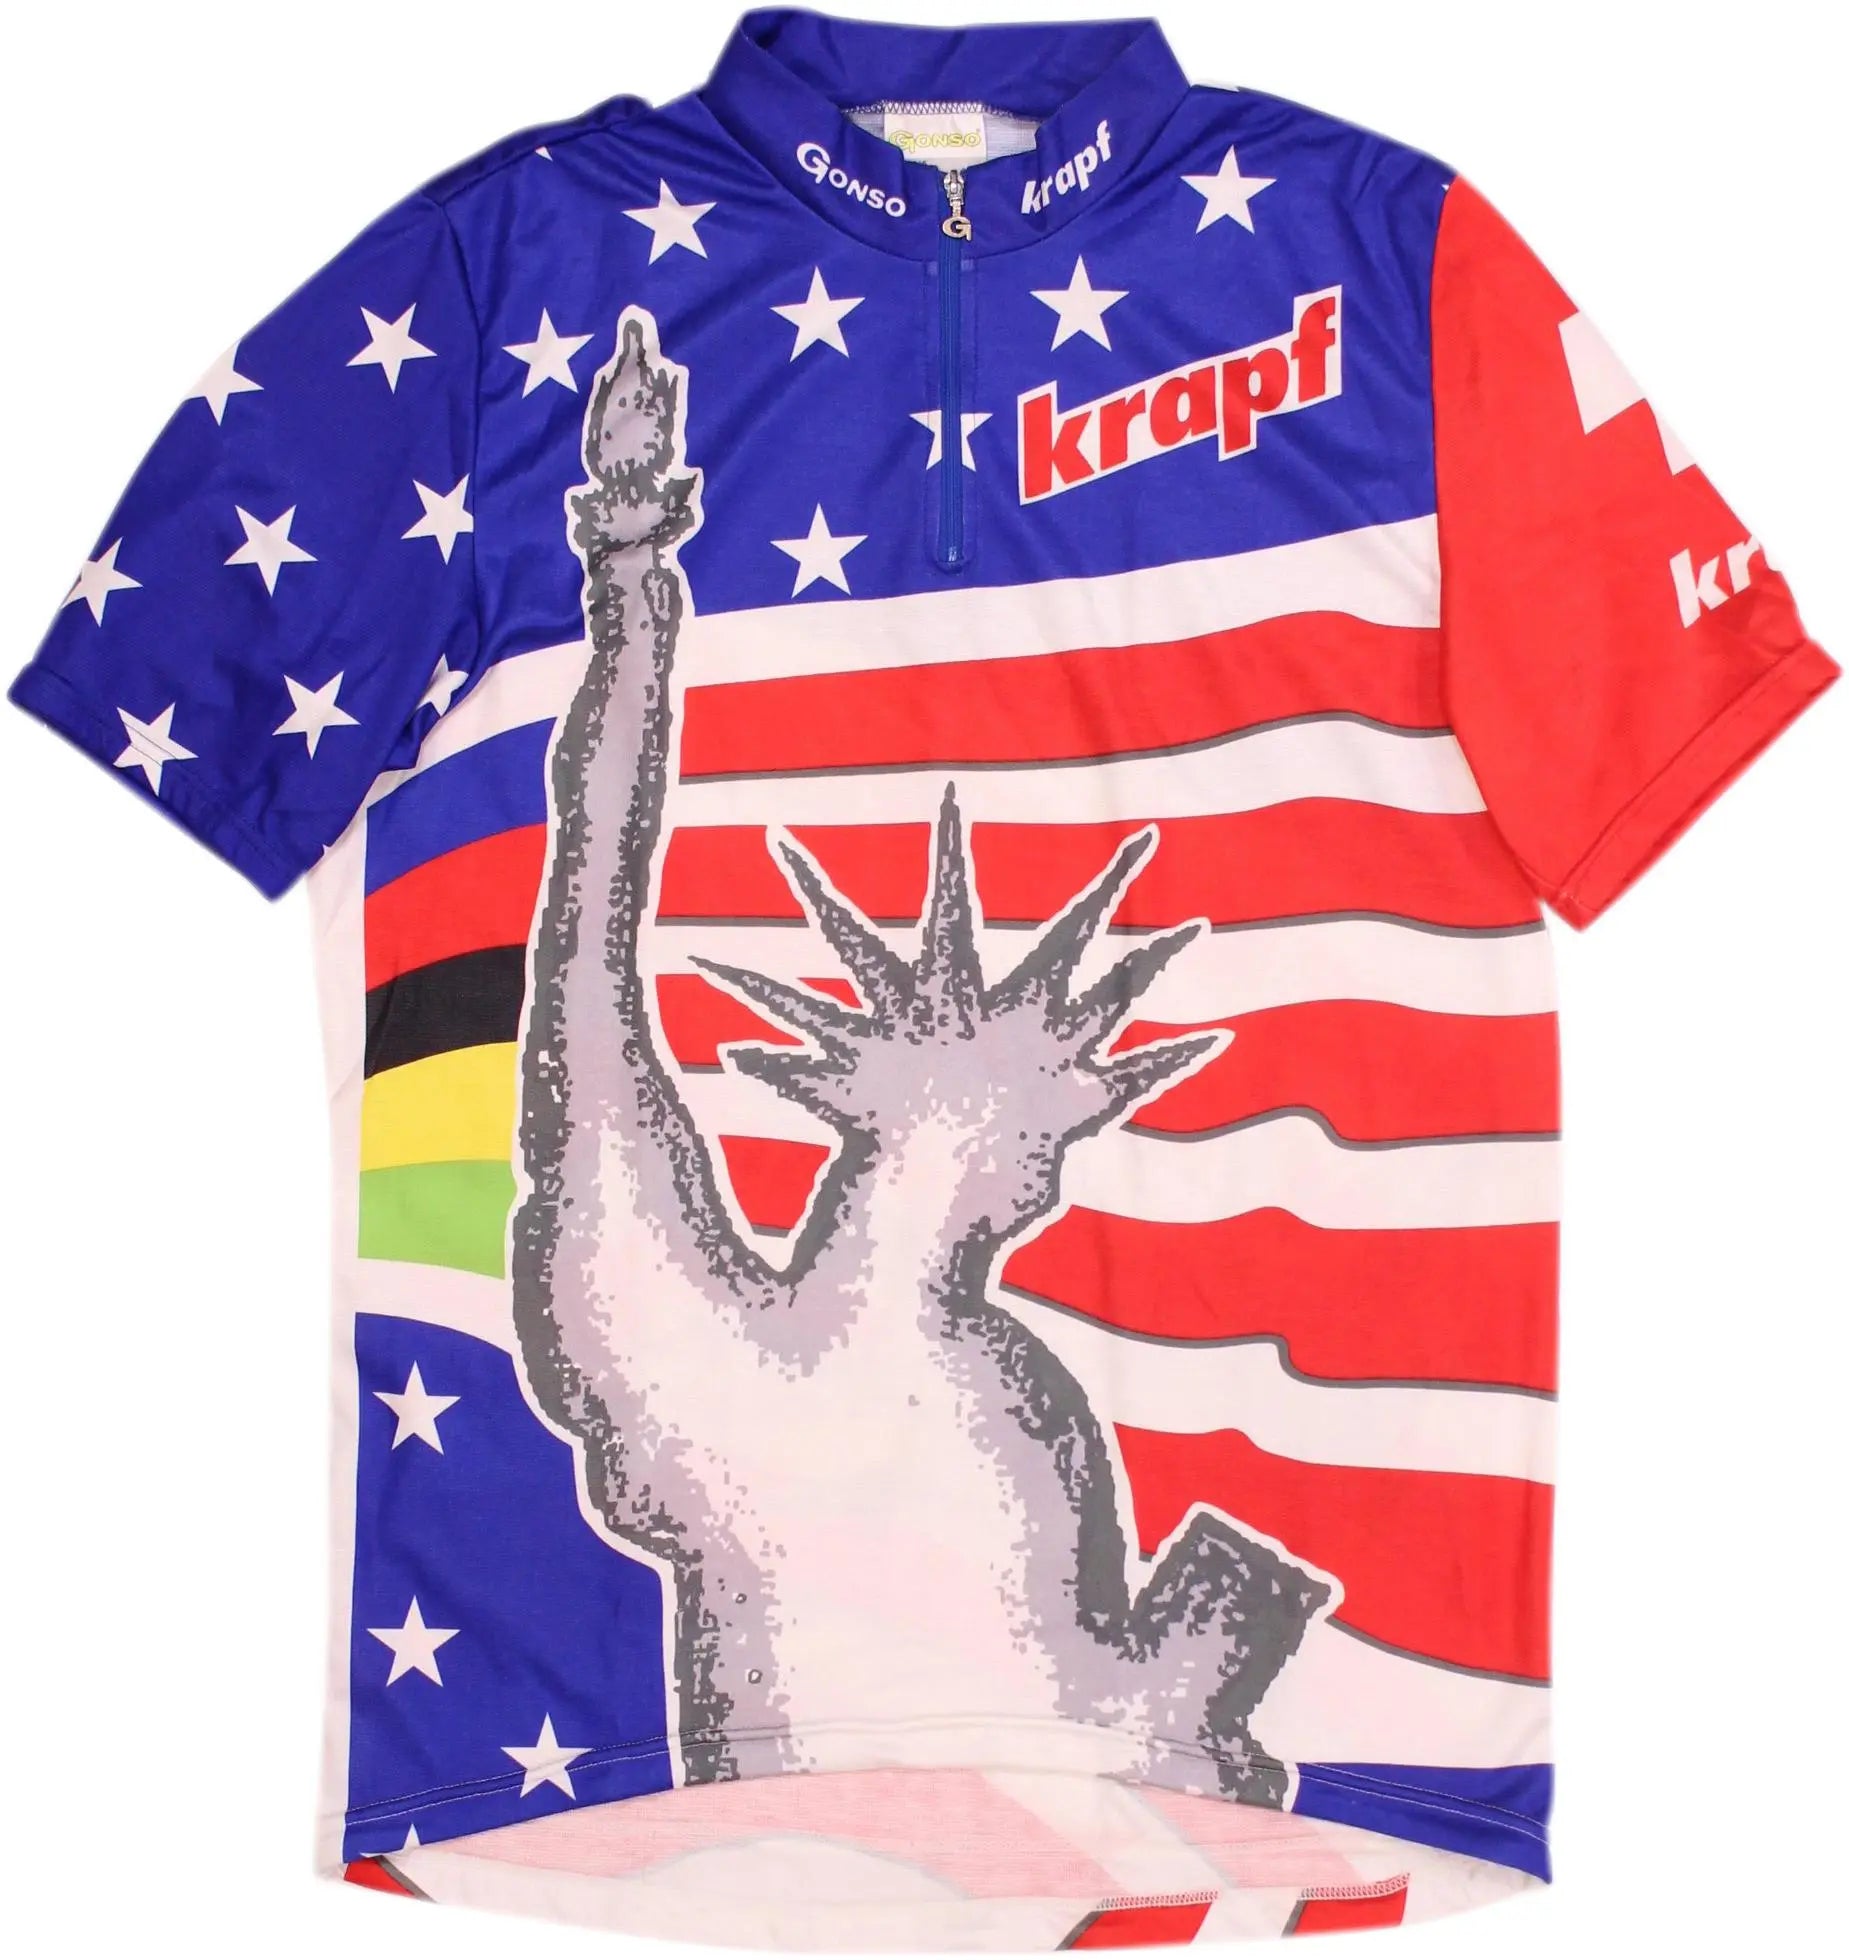 Gonso - Vintage Cycling Bike Shirt with American Theme- ThriftTale.com - Vintage and second handclothing